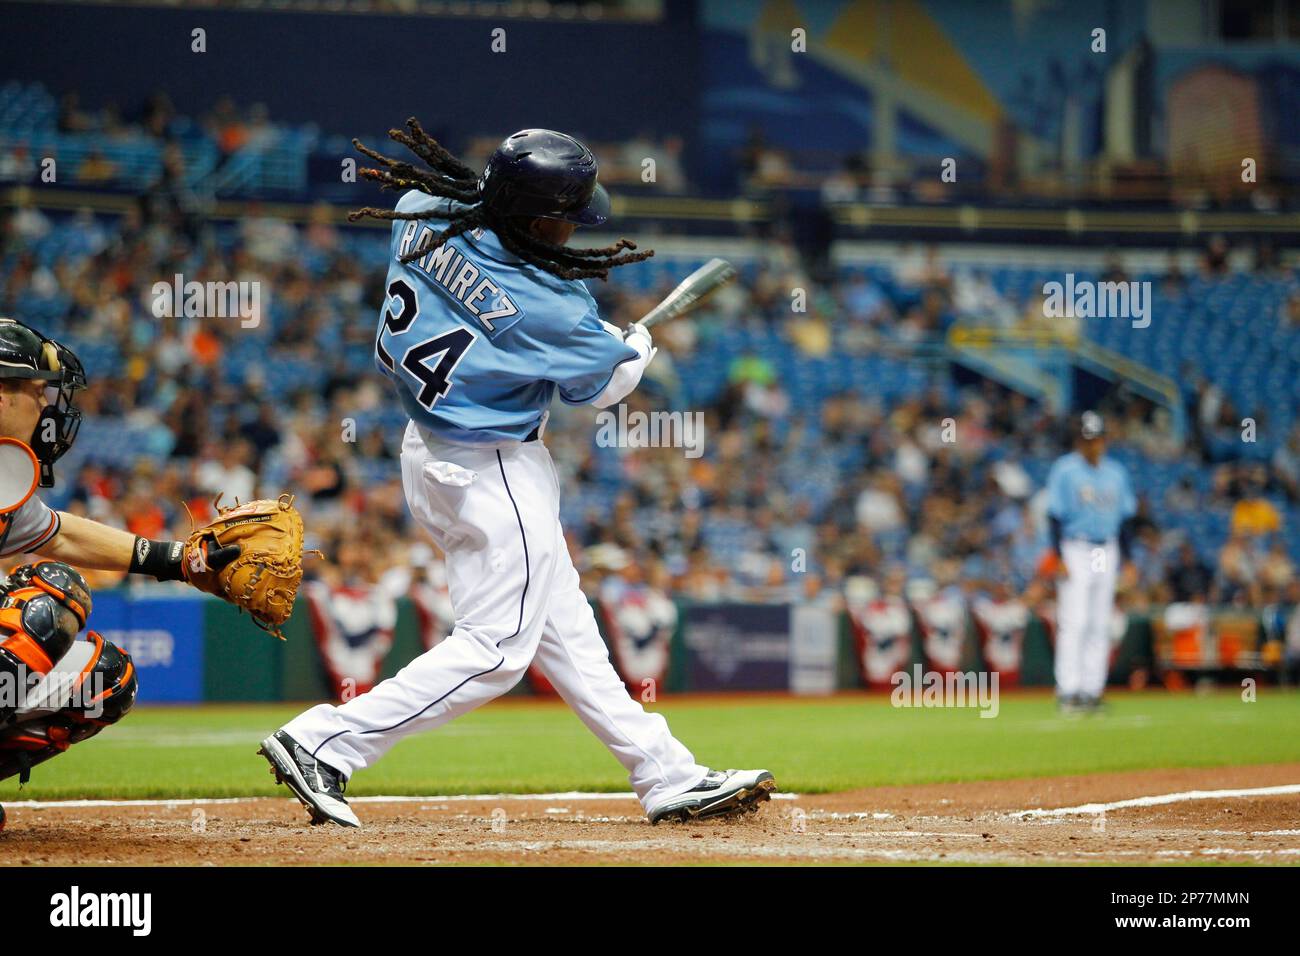 Tampa Bay Rays Manny Ramirez plays in a game against the Baltimore Orioles  Tropicana Park in St.Petersburg,Florida.April 3,2011( AP Photo/Tom DiPace  Stock Photo - Alamy